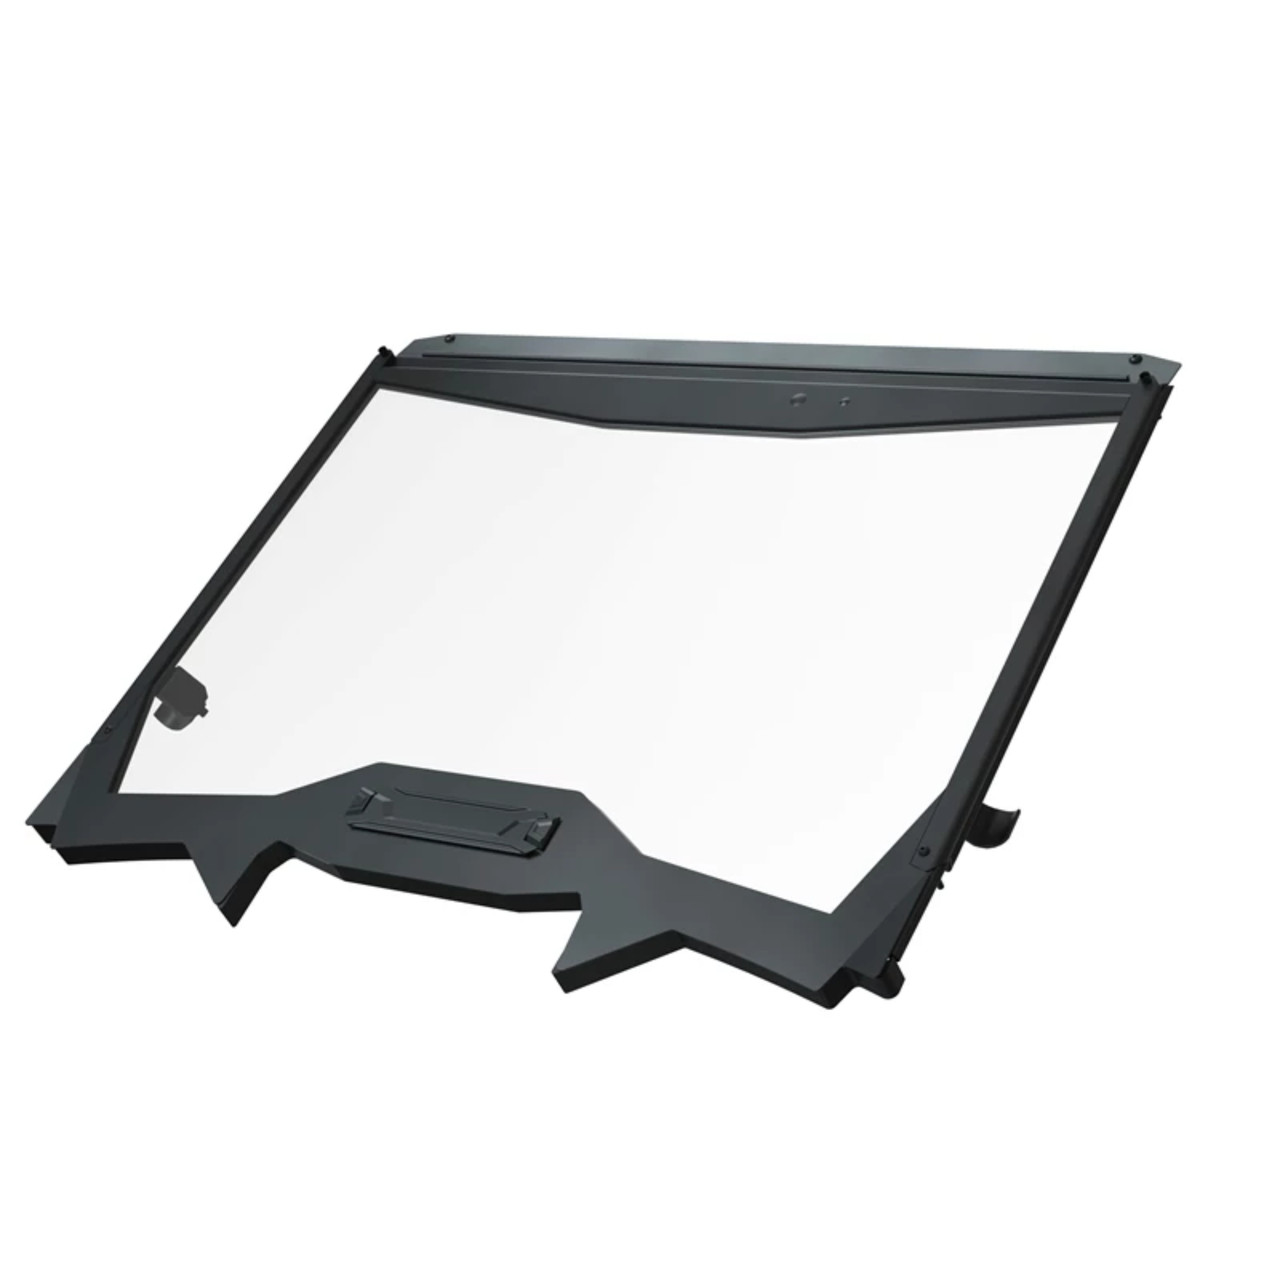 Polaris New OEM Full Vented Glass Windshield for RZR, 2884823